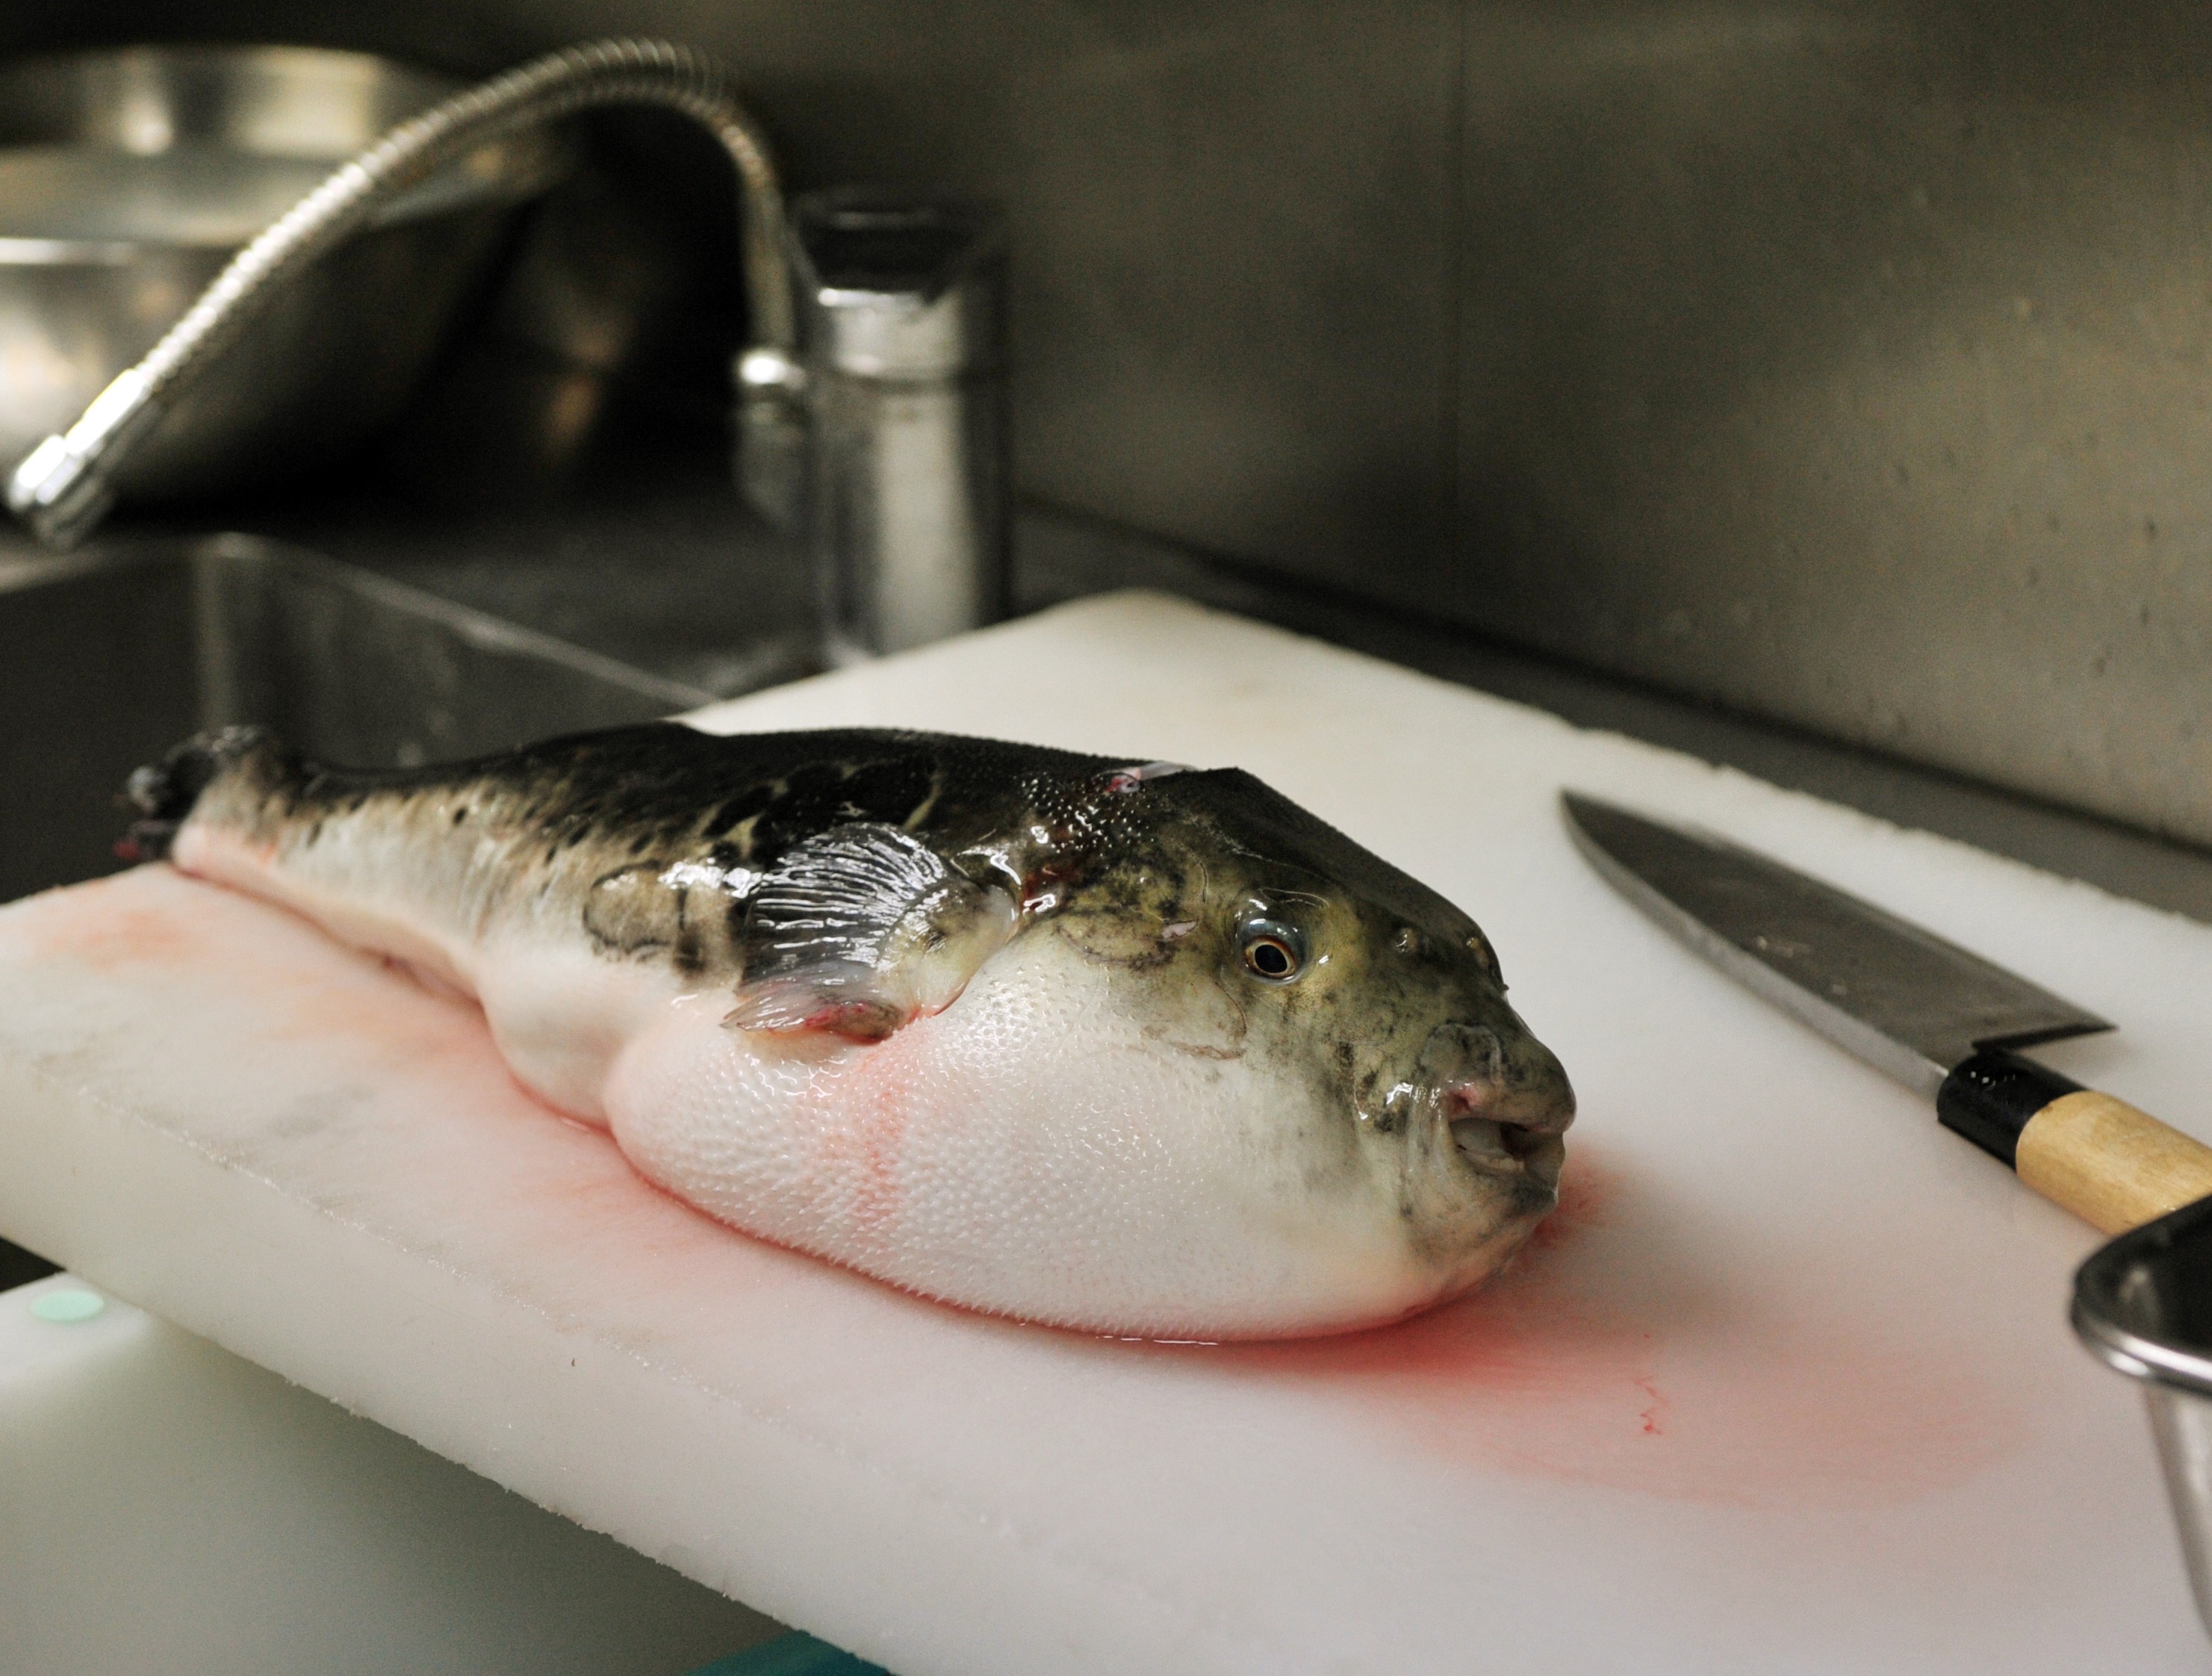 In a picture taken on June 5, 2012, a pufferfish, known as fugu in Japan, is seen on a chopping board to remove toxic internal organs at a restaurant "Torafugu-tei" in Tokyo. (Yoshikazu Tsuno—AFP/Getty Images)